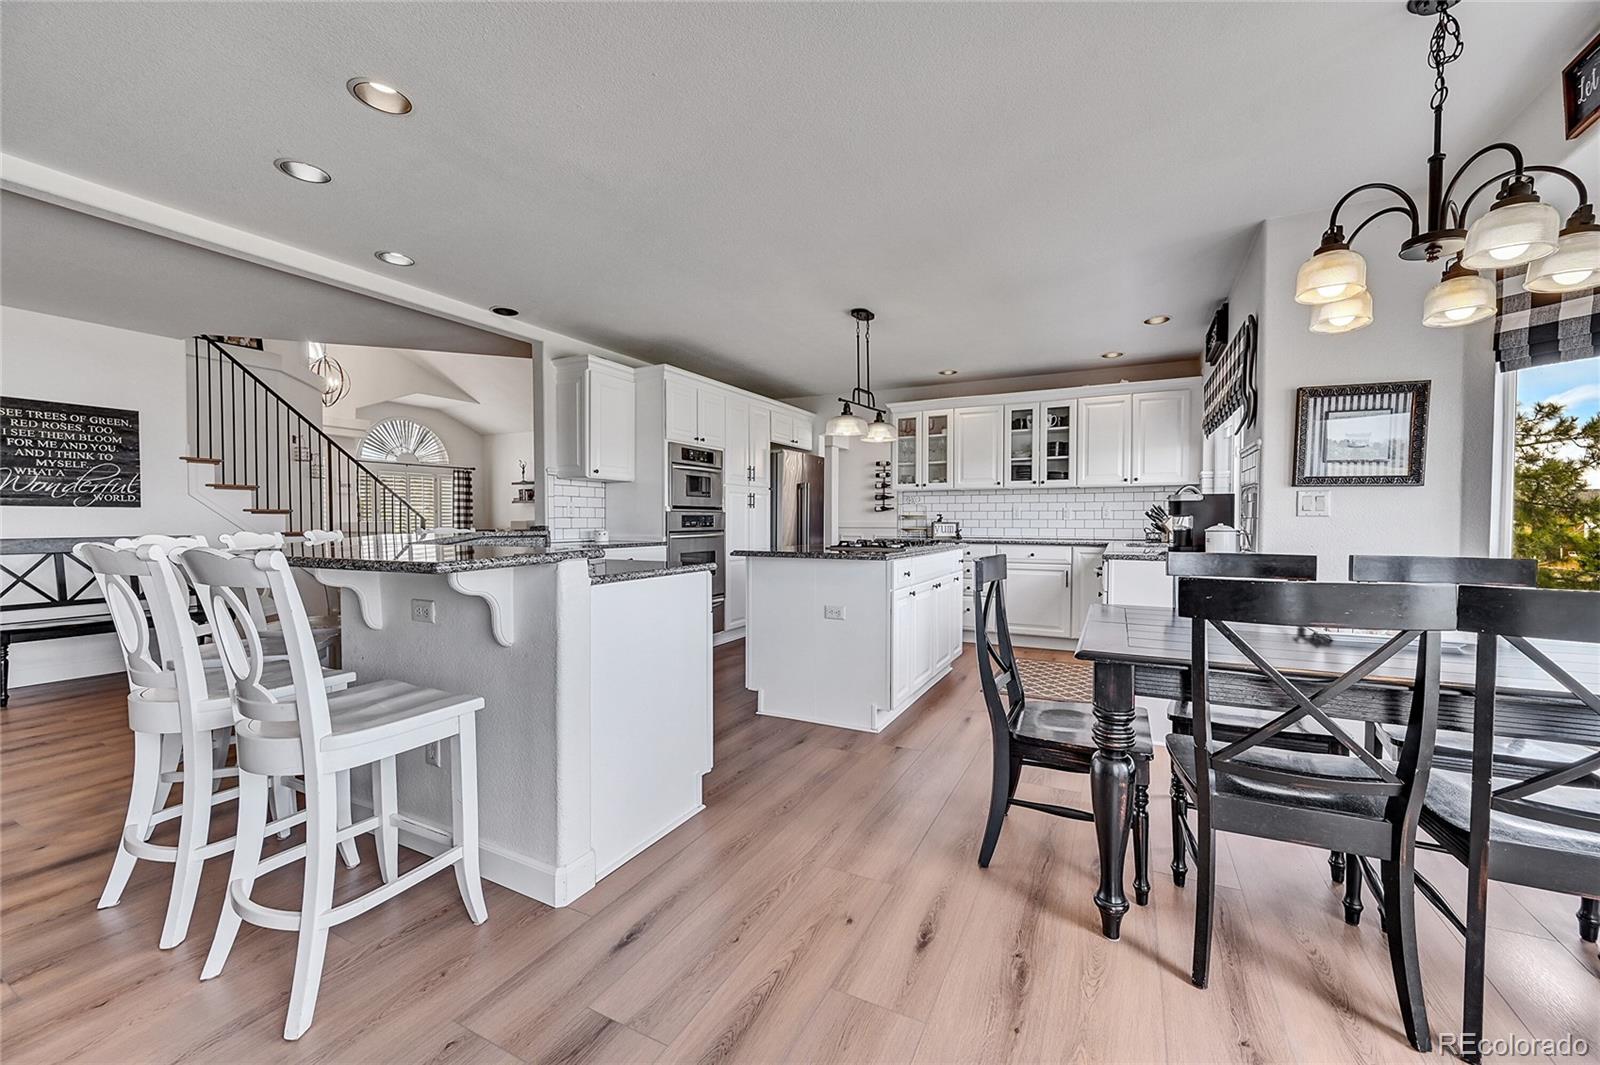 a kitchen with stainless steel appliances a dining table chairs stove and white cabinets